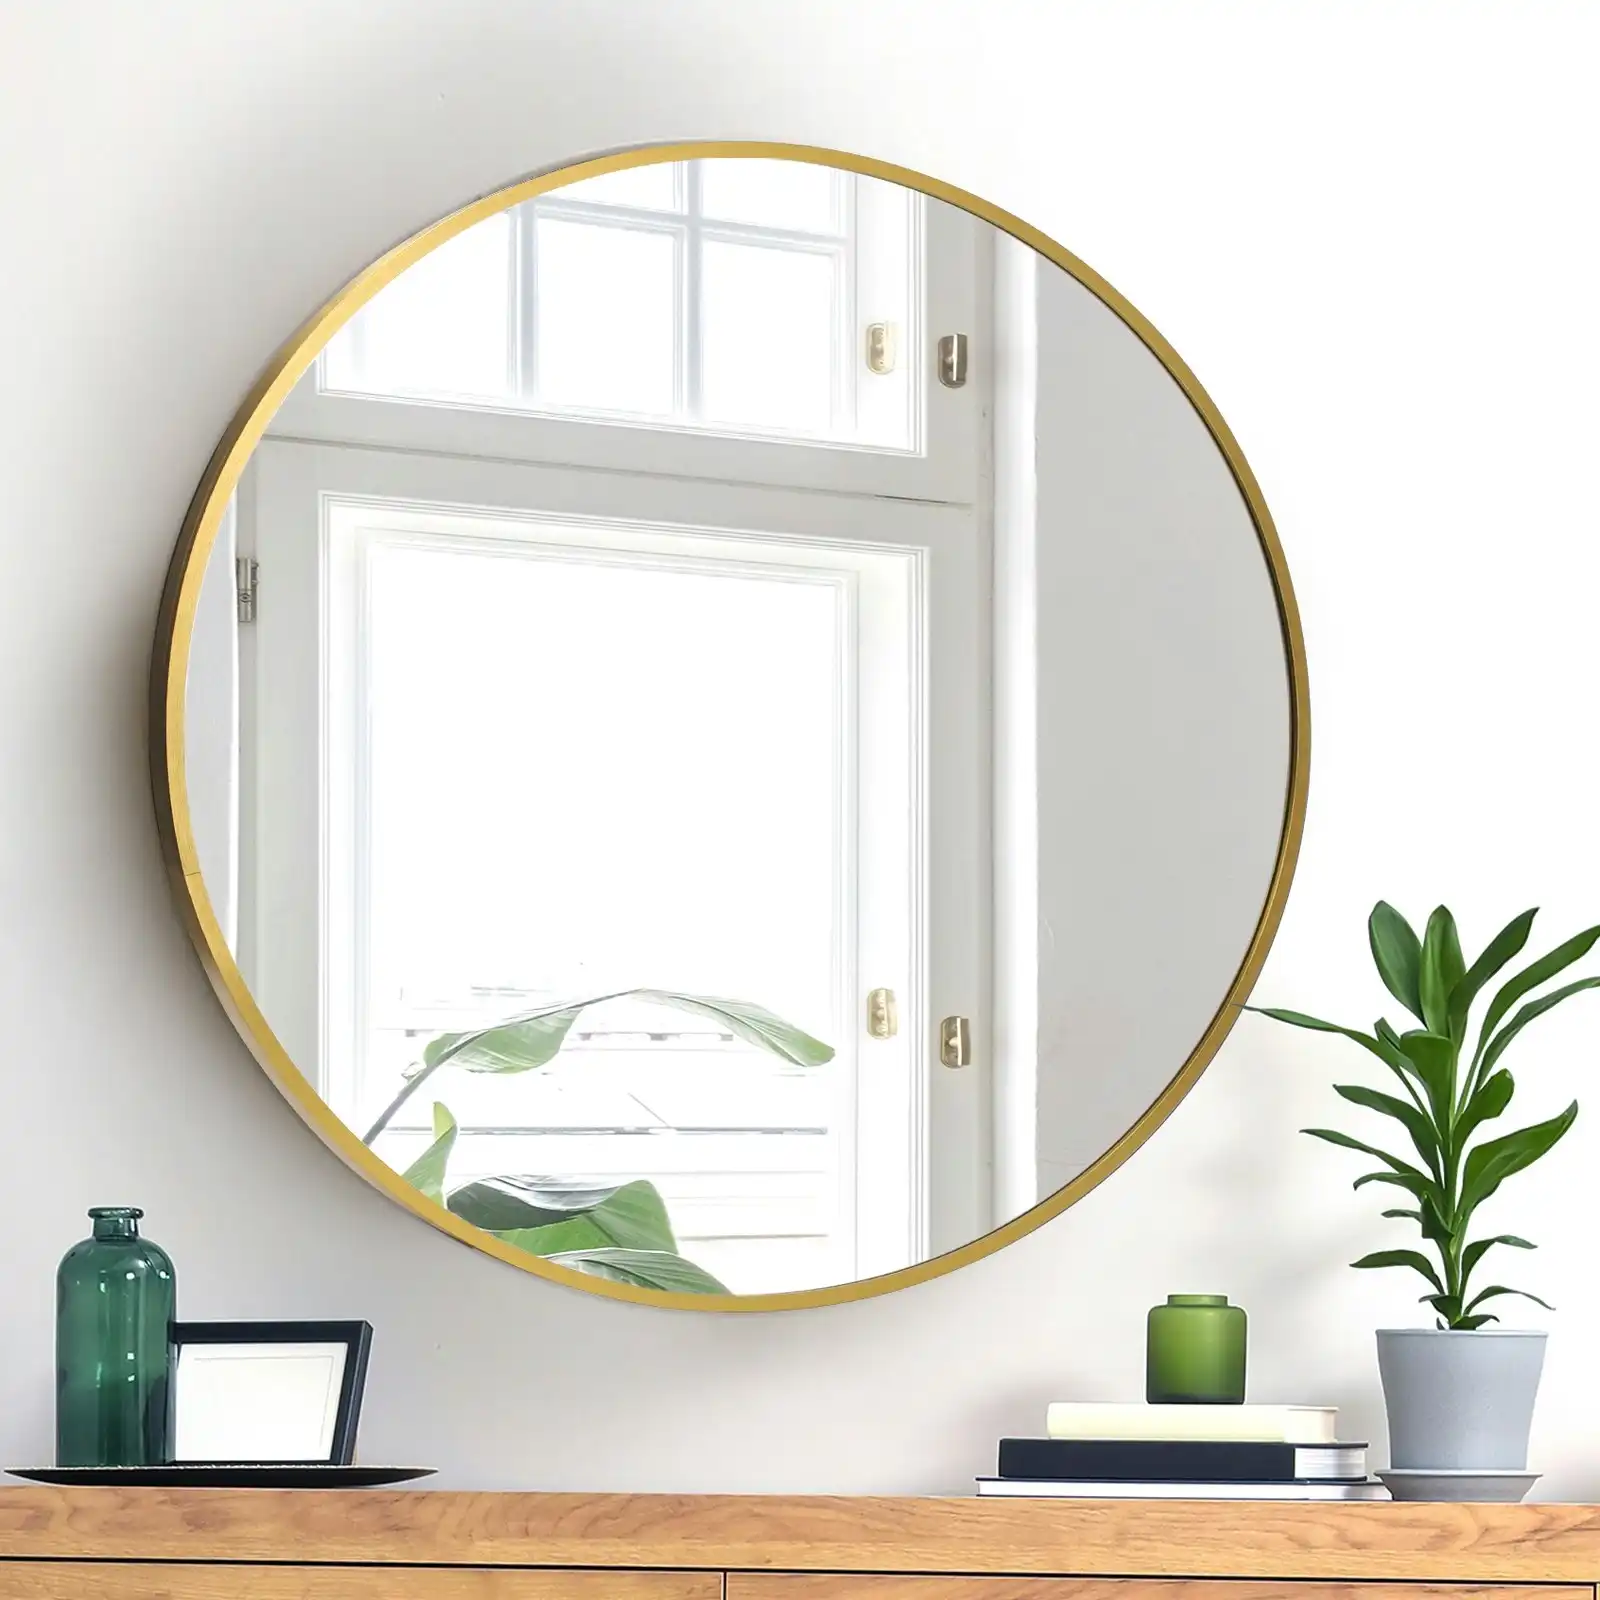 Oikiture Wall Mirrors Round 70cm Makeup Mirror Vanity Home Decor Gold Bathroom